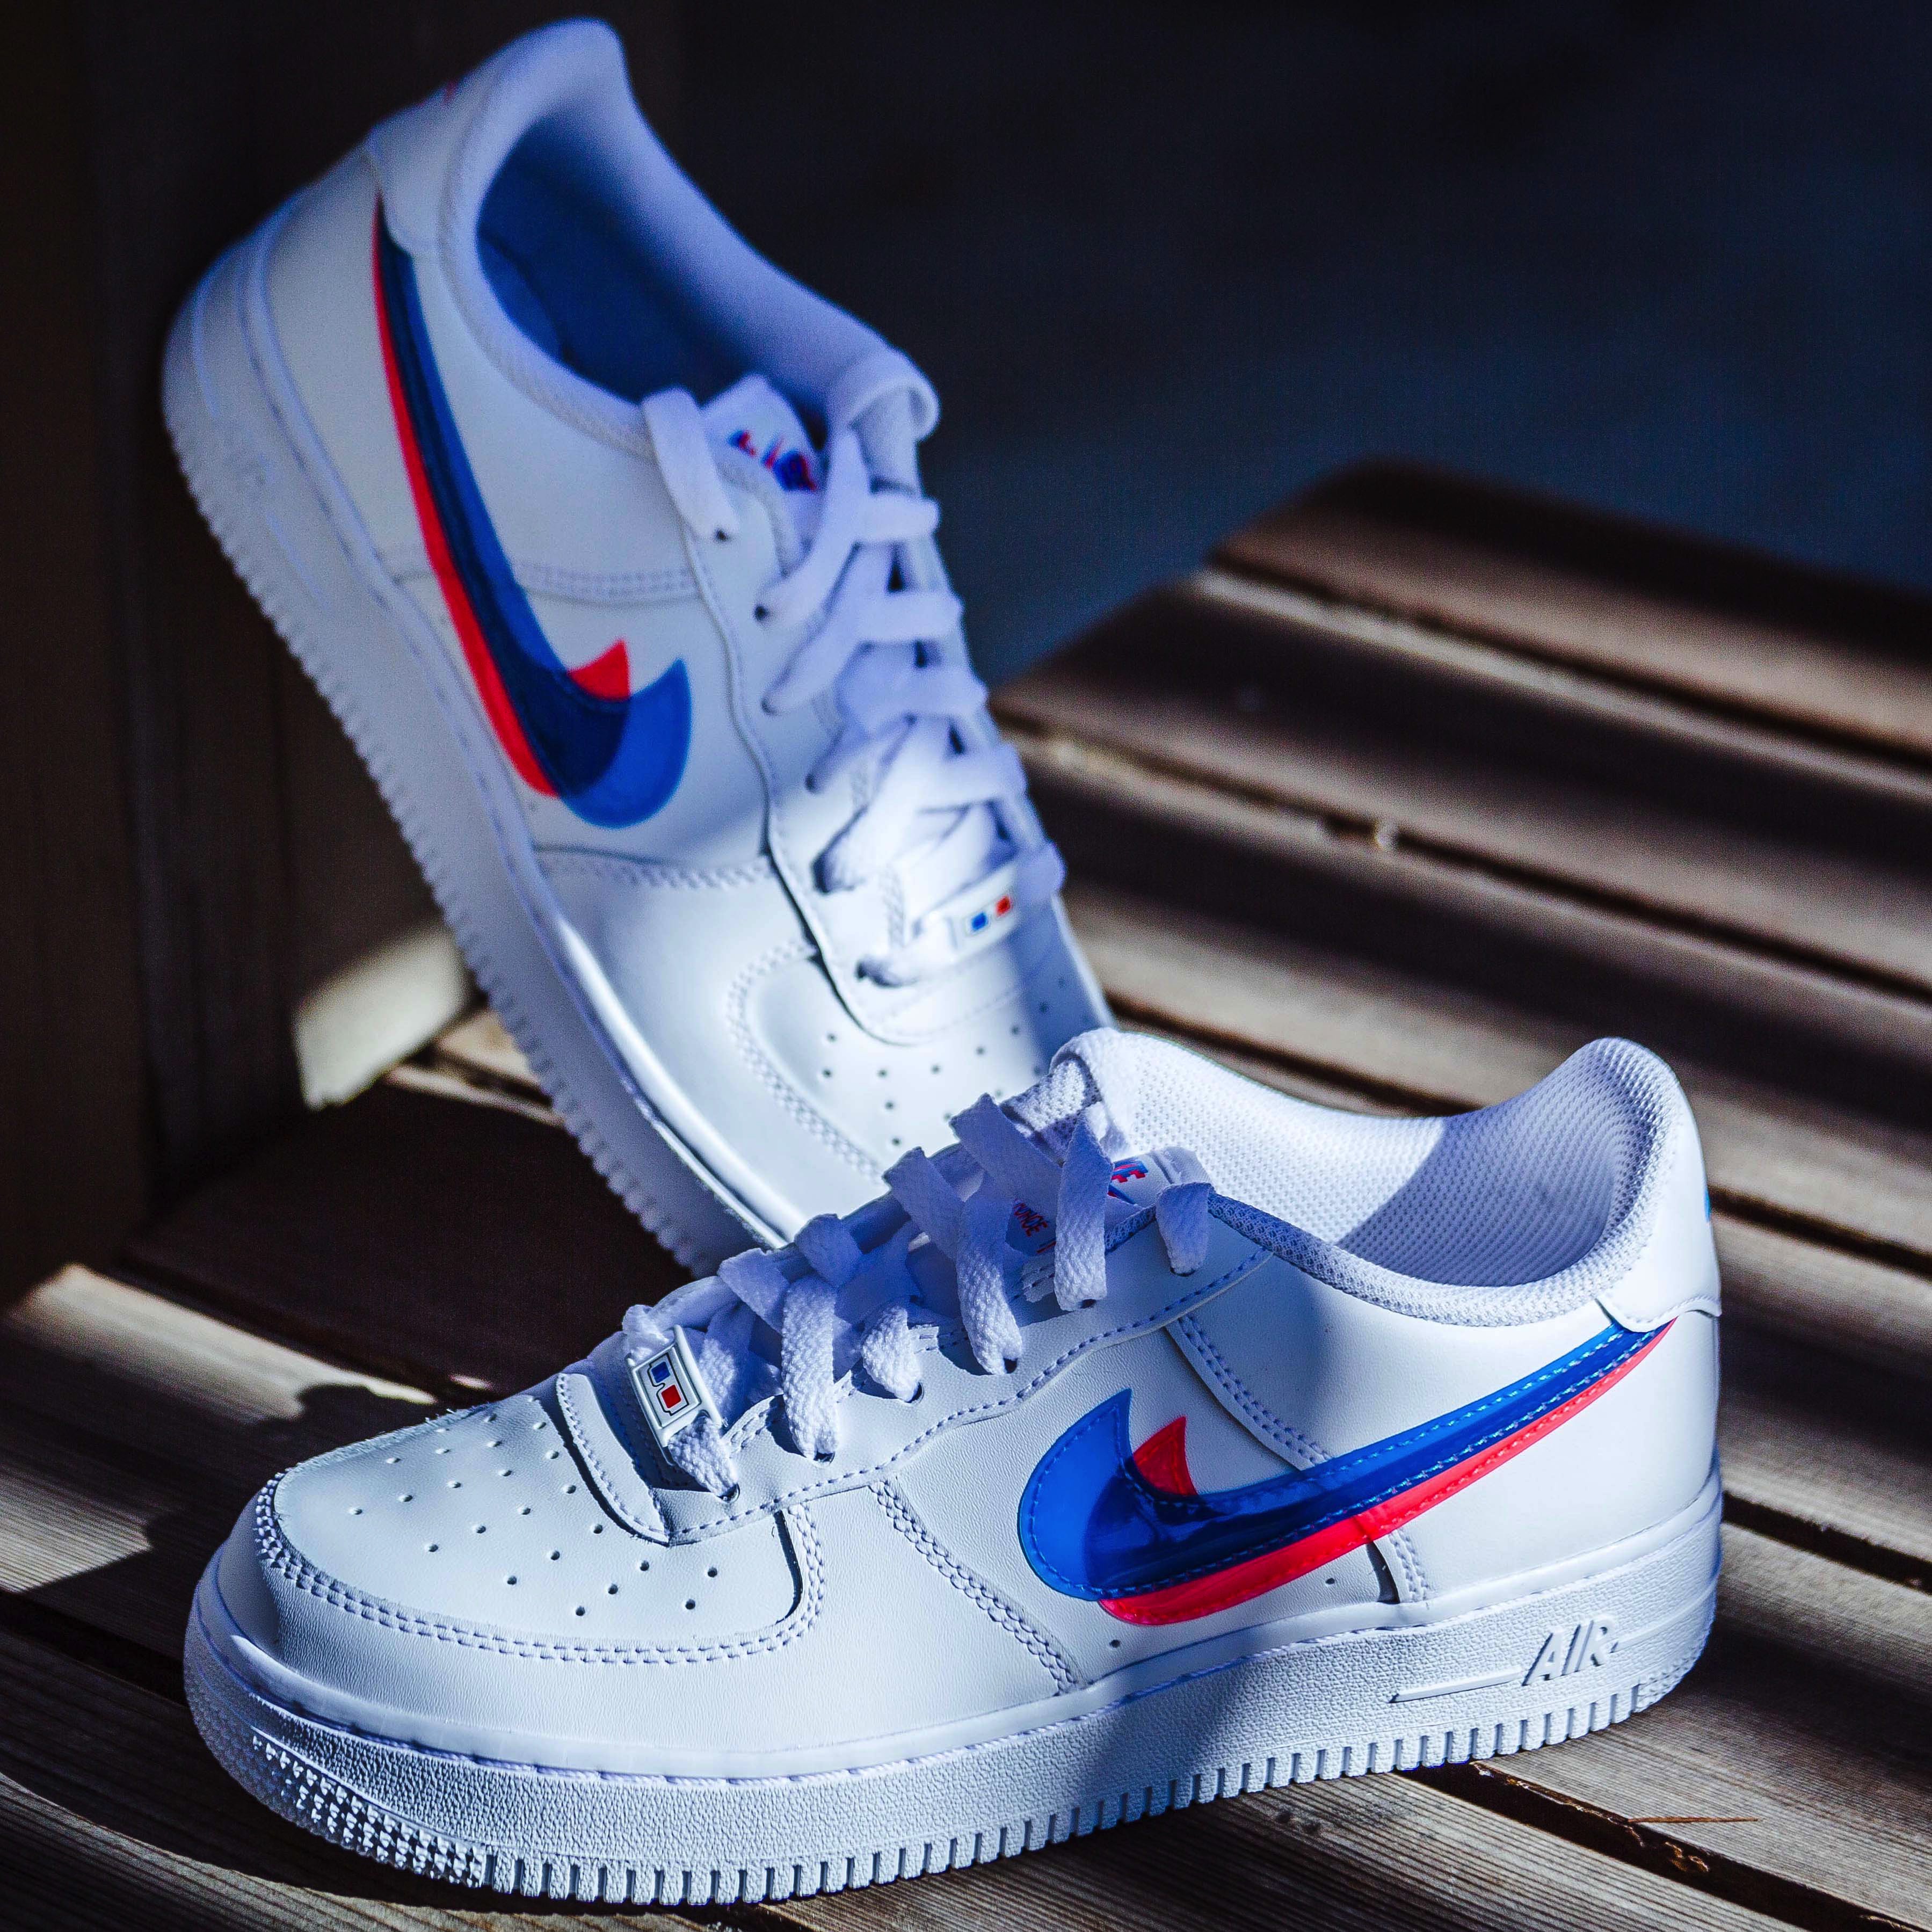 Twitter 上的 Shiekh.com："You will need 3D Glasses to see this #Nike Air Force 1! 👓👓 ​▫️ ​Nike Air Foce 1 LV8 '3D Glasses' ​Available now on https://t.co/iP2xathB4D! ​🔎: https://t.co/vG7n3IeJR6 ​ ​#Nike #